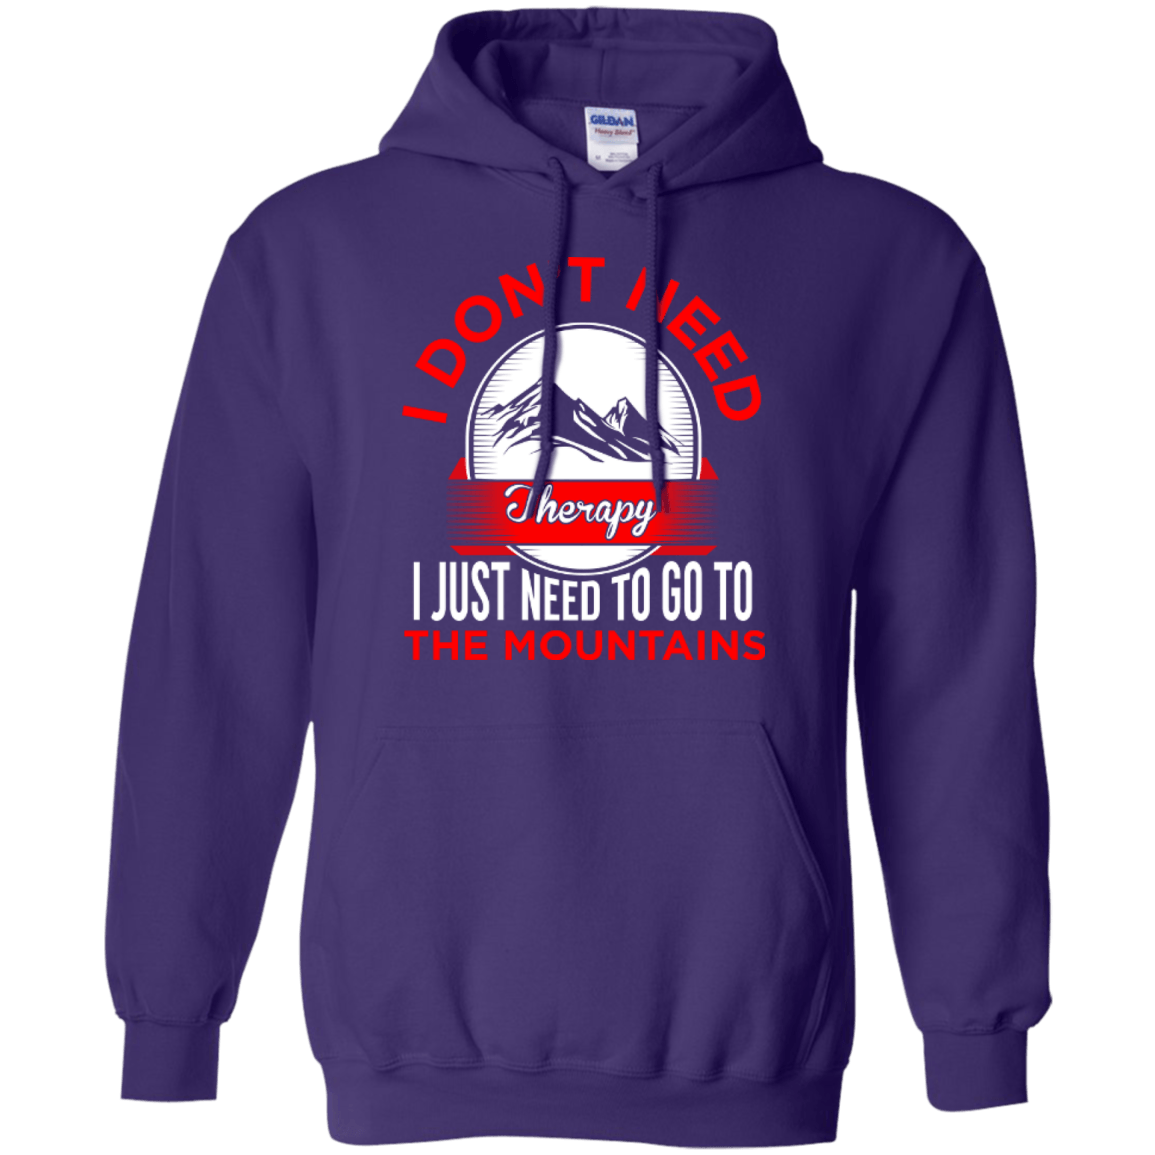 I Don't Need Therapy I Just Need To Go To The Mountains Hoodies - Powderaddicts